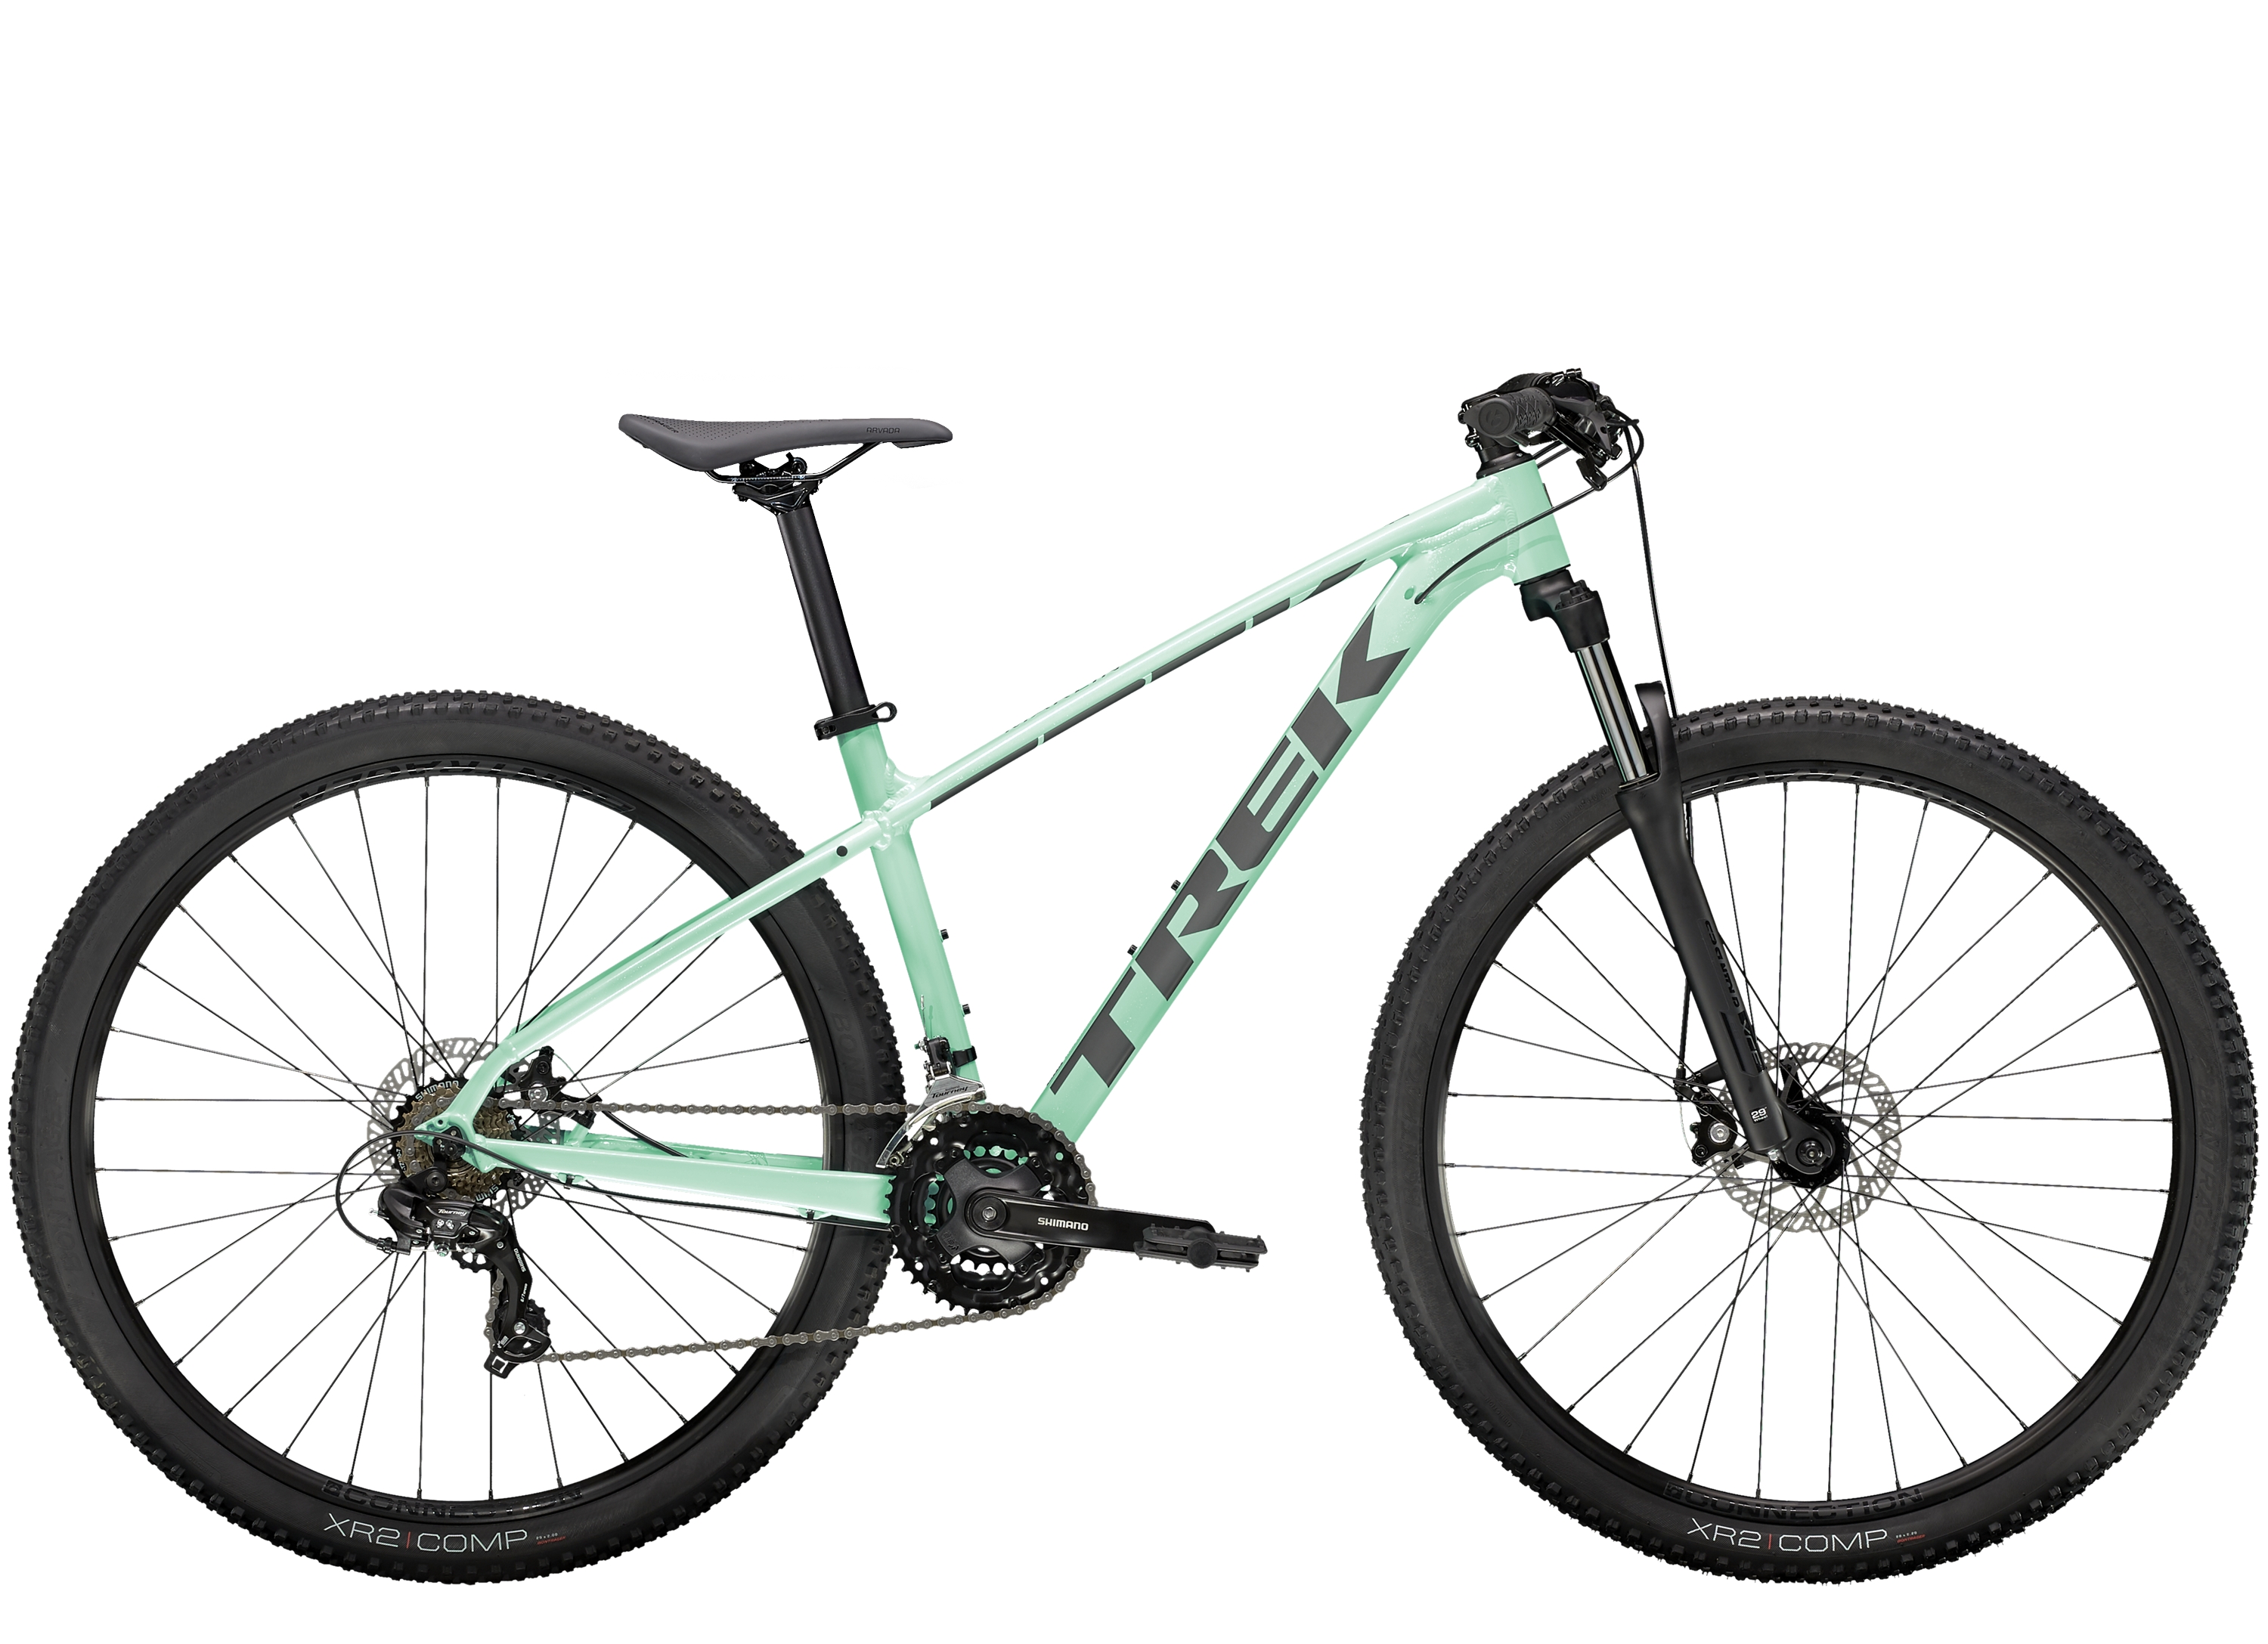 <a href="https://cycles-clement.be/product/marlin-4-l-29-voodoo-aloha-green/">MARLIN 4 L 29 VOODOO ALOHA GREEN</a>